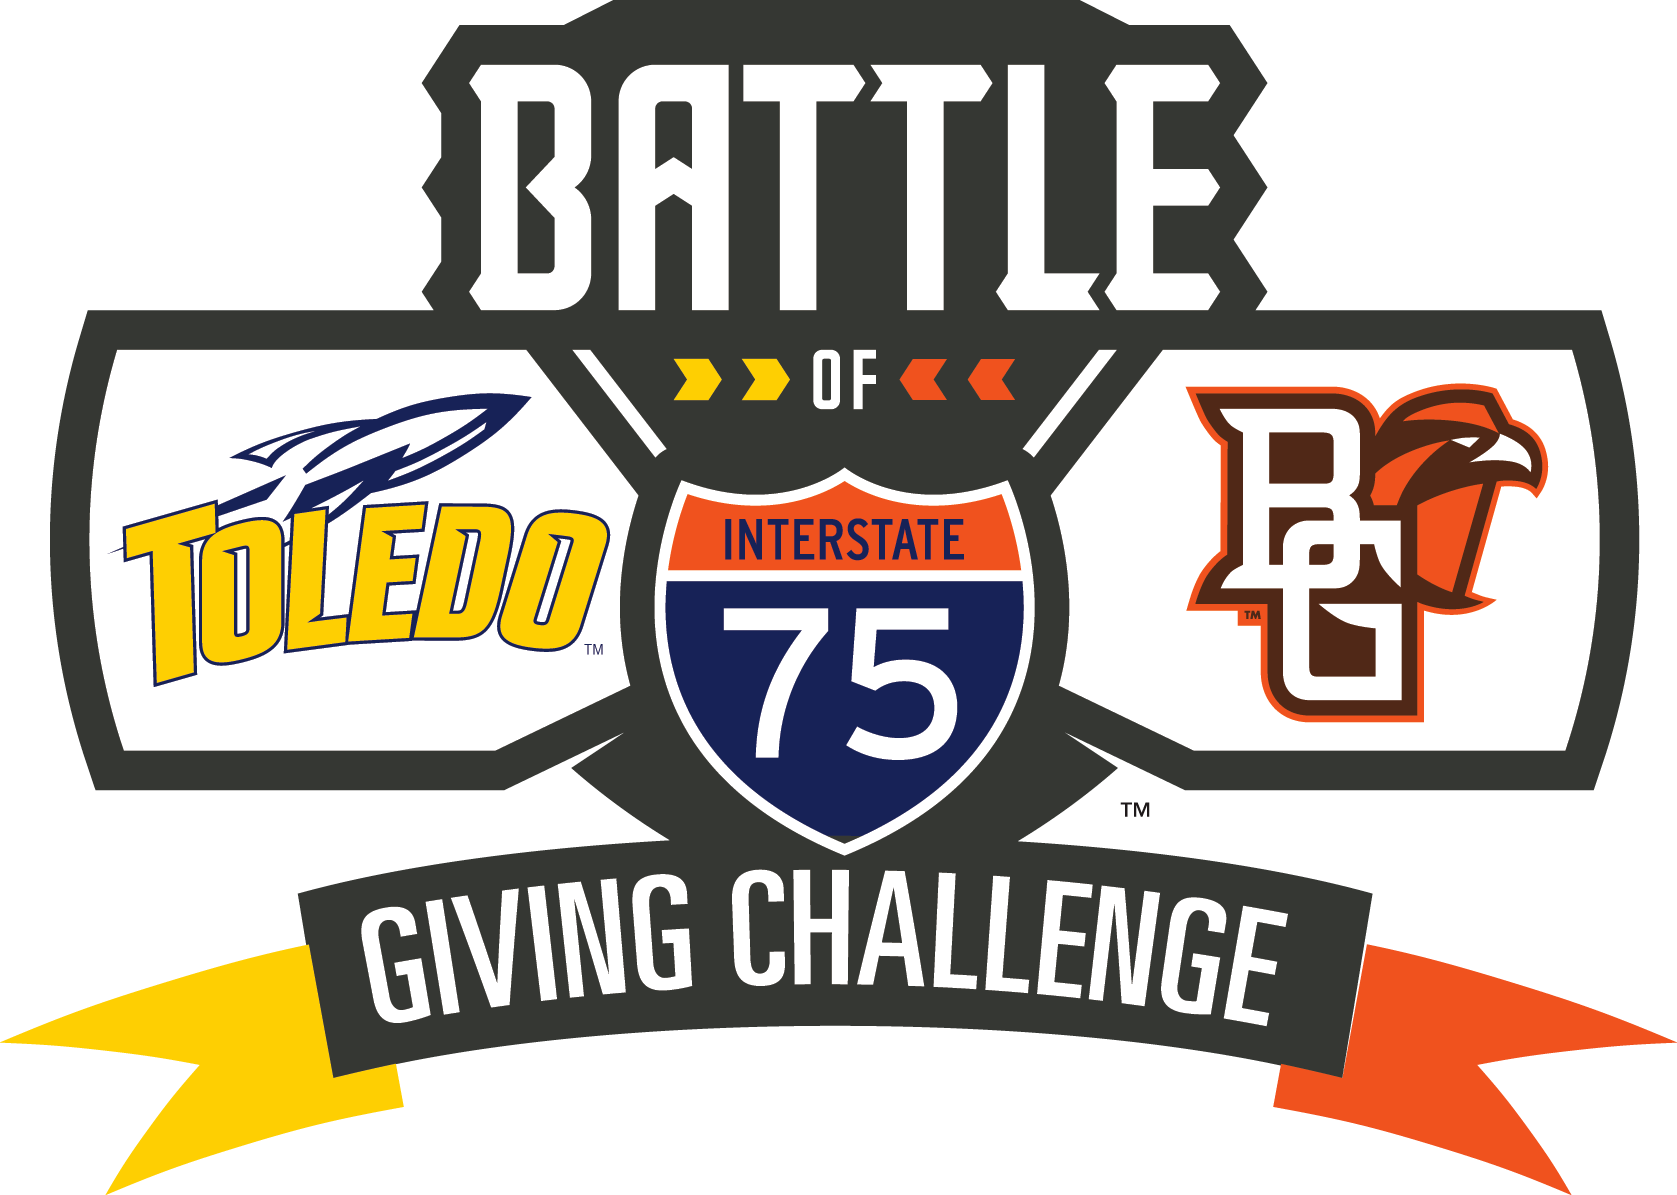 24UA3515 Add "Giving Challenge" to Battle of I-75 graphic Oct. 2023 No outline